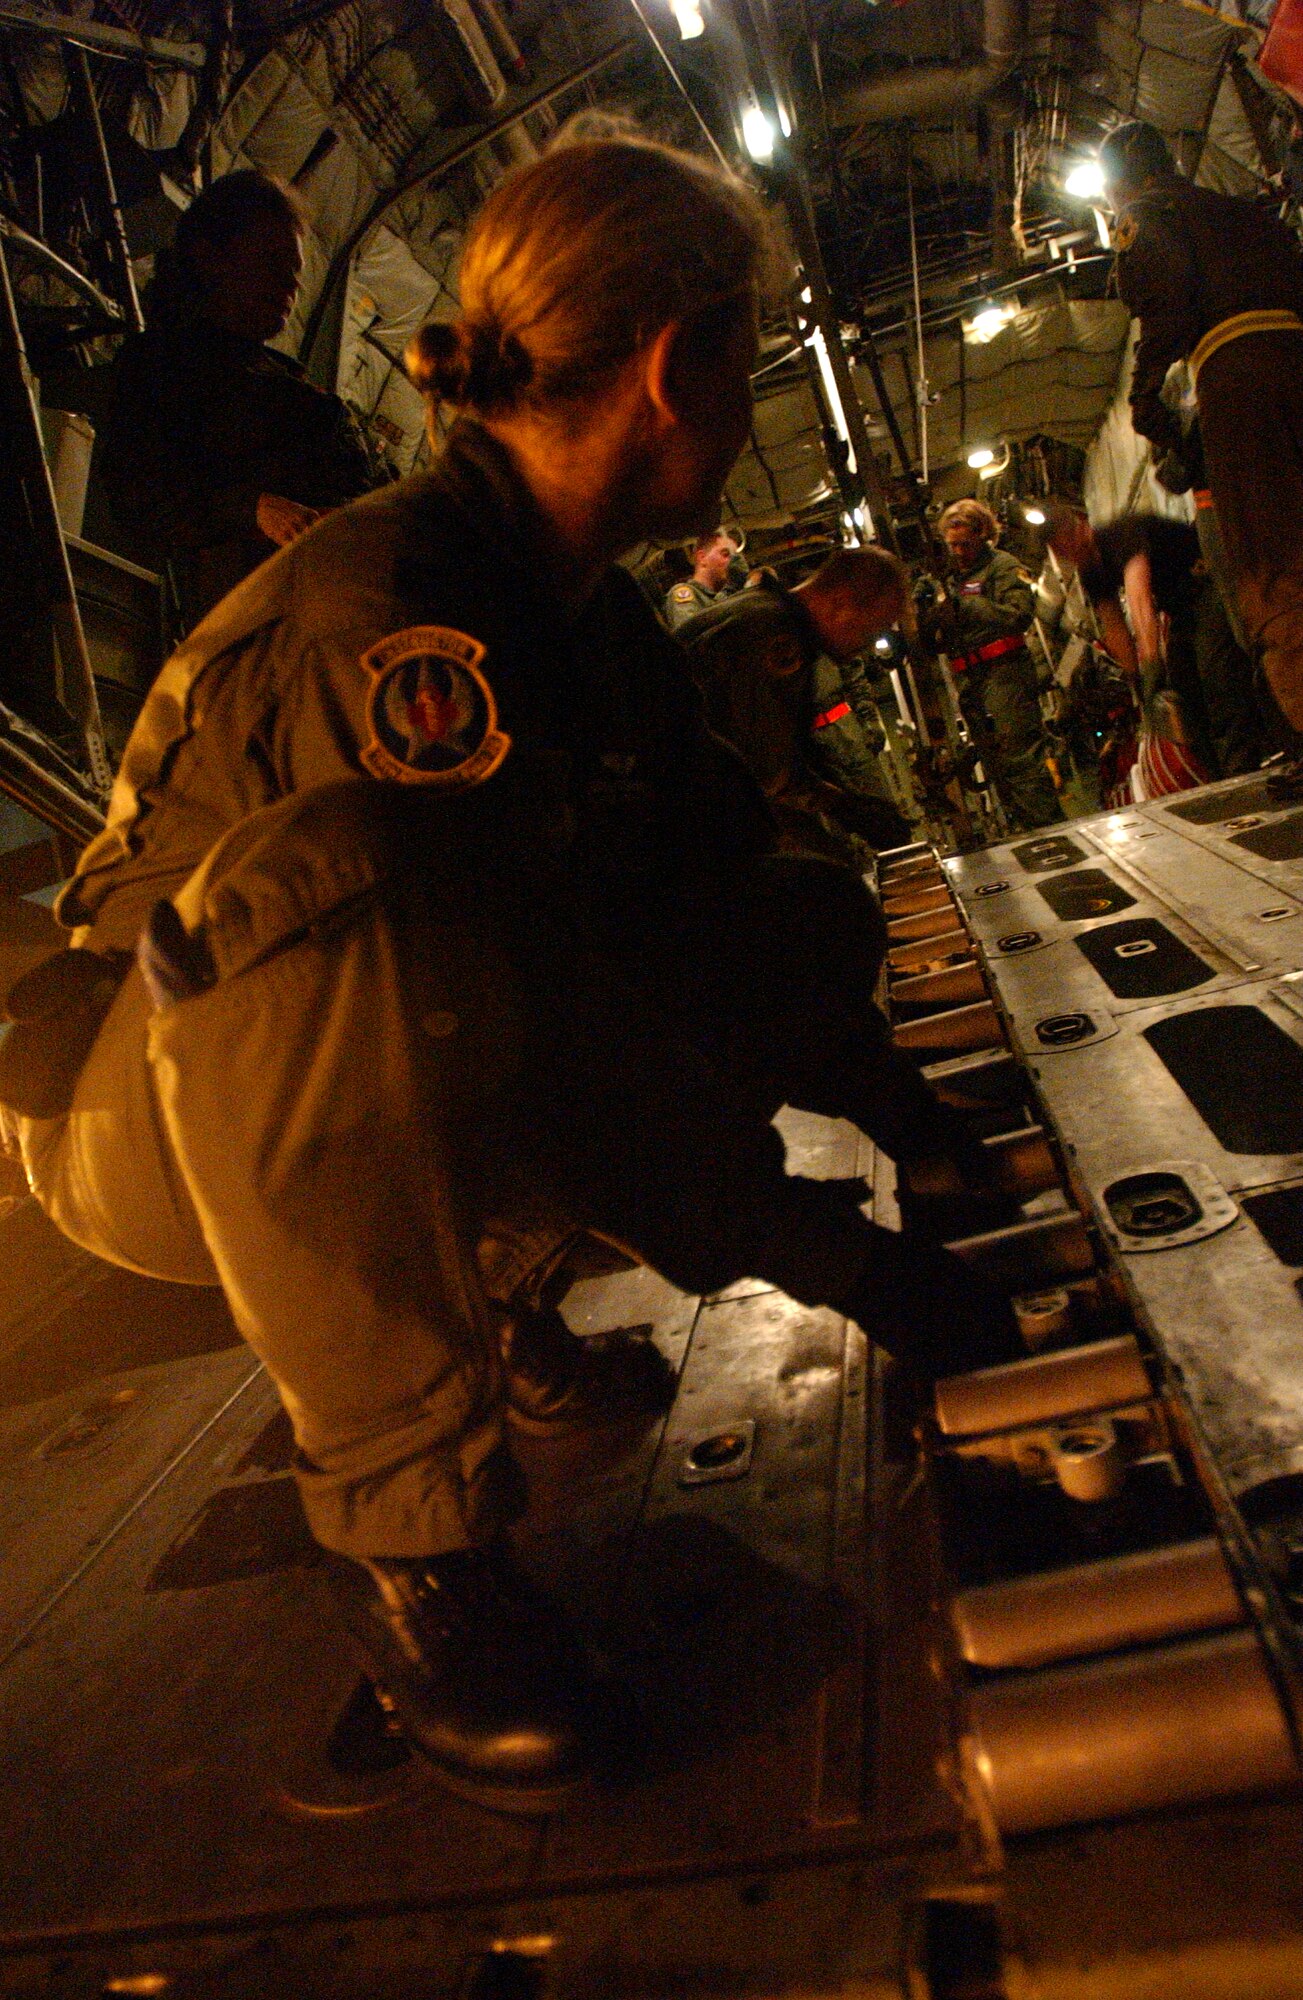 Personnel from the 18th Aeromedical Evacuation Squadron, Kadena Air Base, Japan, train on a C-130 Hercules at Marine Corps Air Station Futenma, Japan, in preparation for Air Mobility Rodeo 2007. Before practicing, the aircraft must be configured by removing rails on the floor and connecting all extension poles to make it aerial evacuation capable. U.S. Air Force photo/Staff Sgt. Reynaldo Ramon


